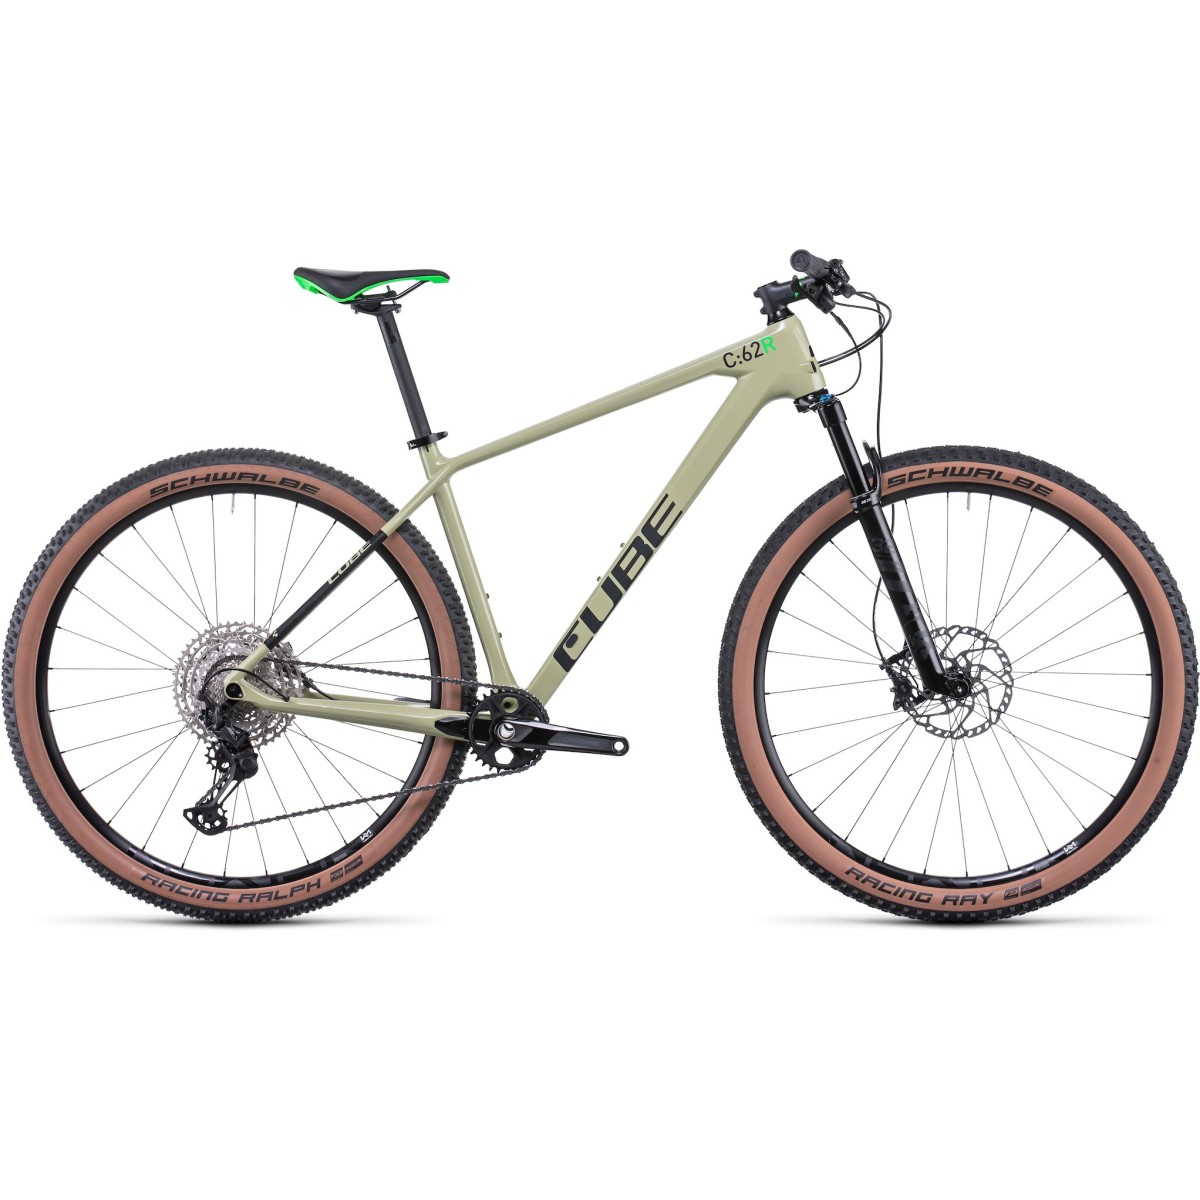 CUBE REACTION C:62 RACE bicycle - green/flashgreen